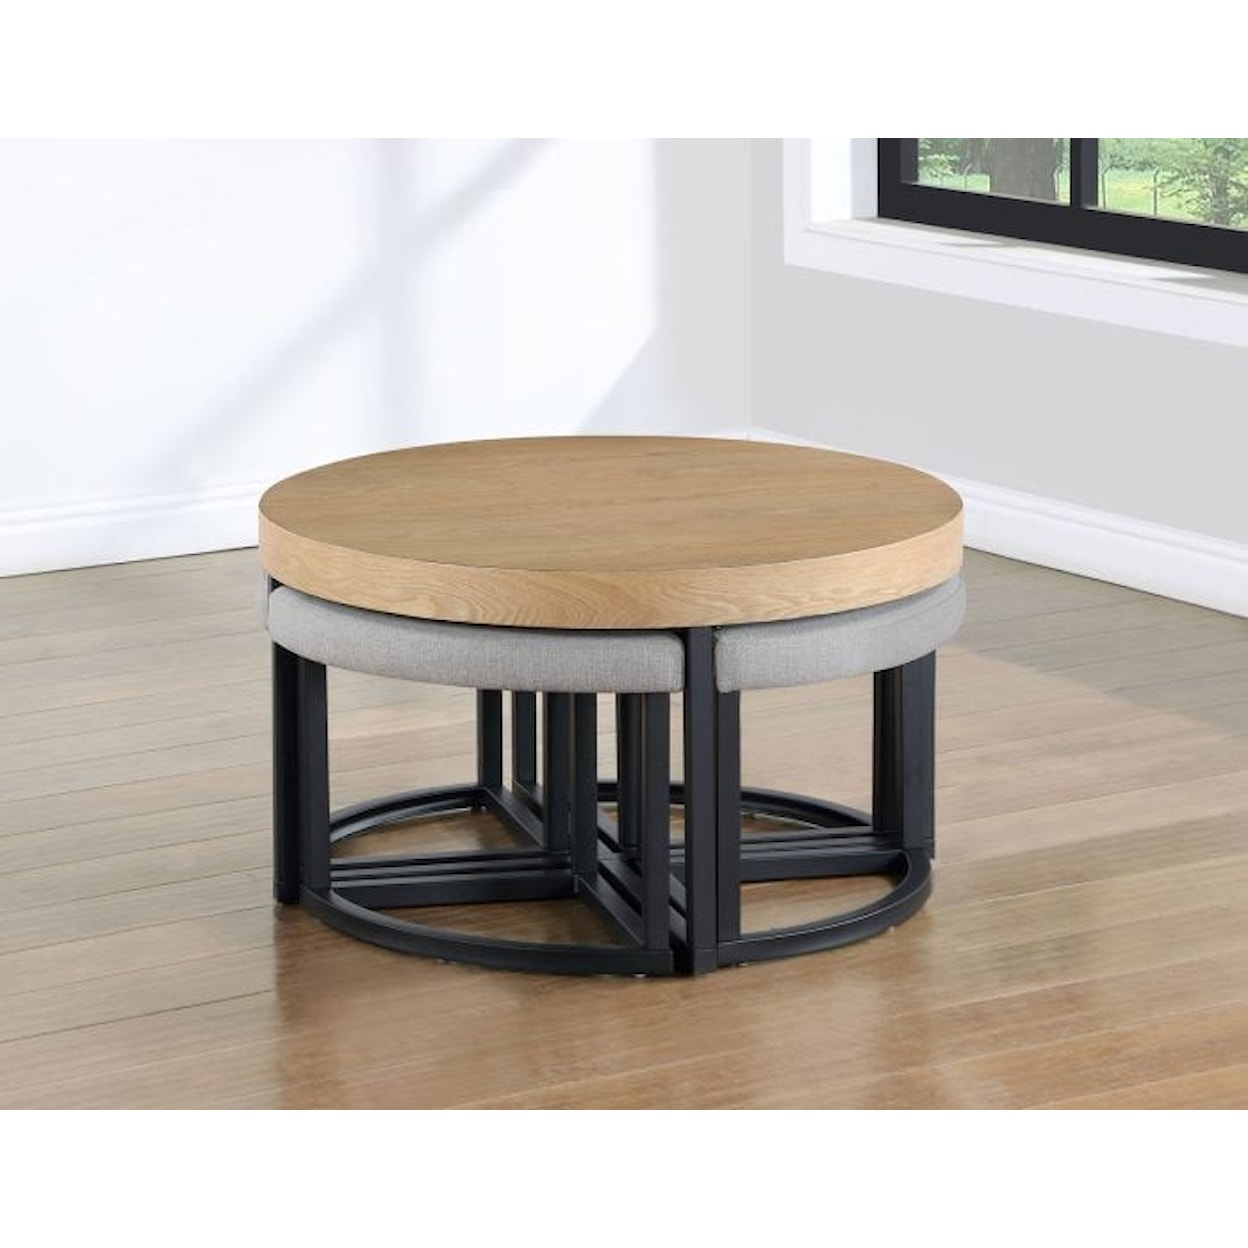 Steve Silver Magnolia YUCATAN NATURAL COFFEE TABLE WITH | 4 STOOLS